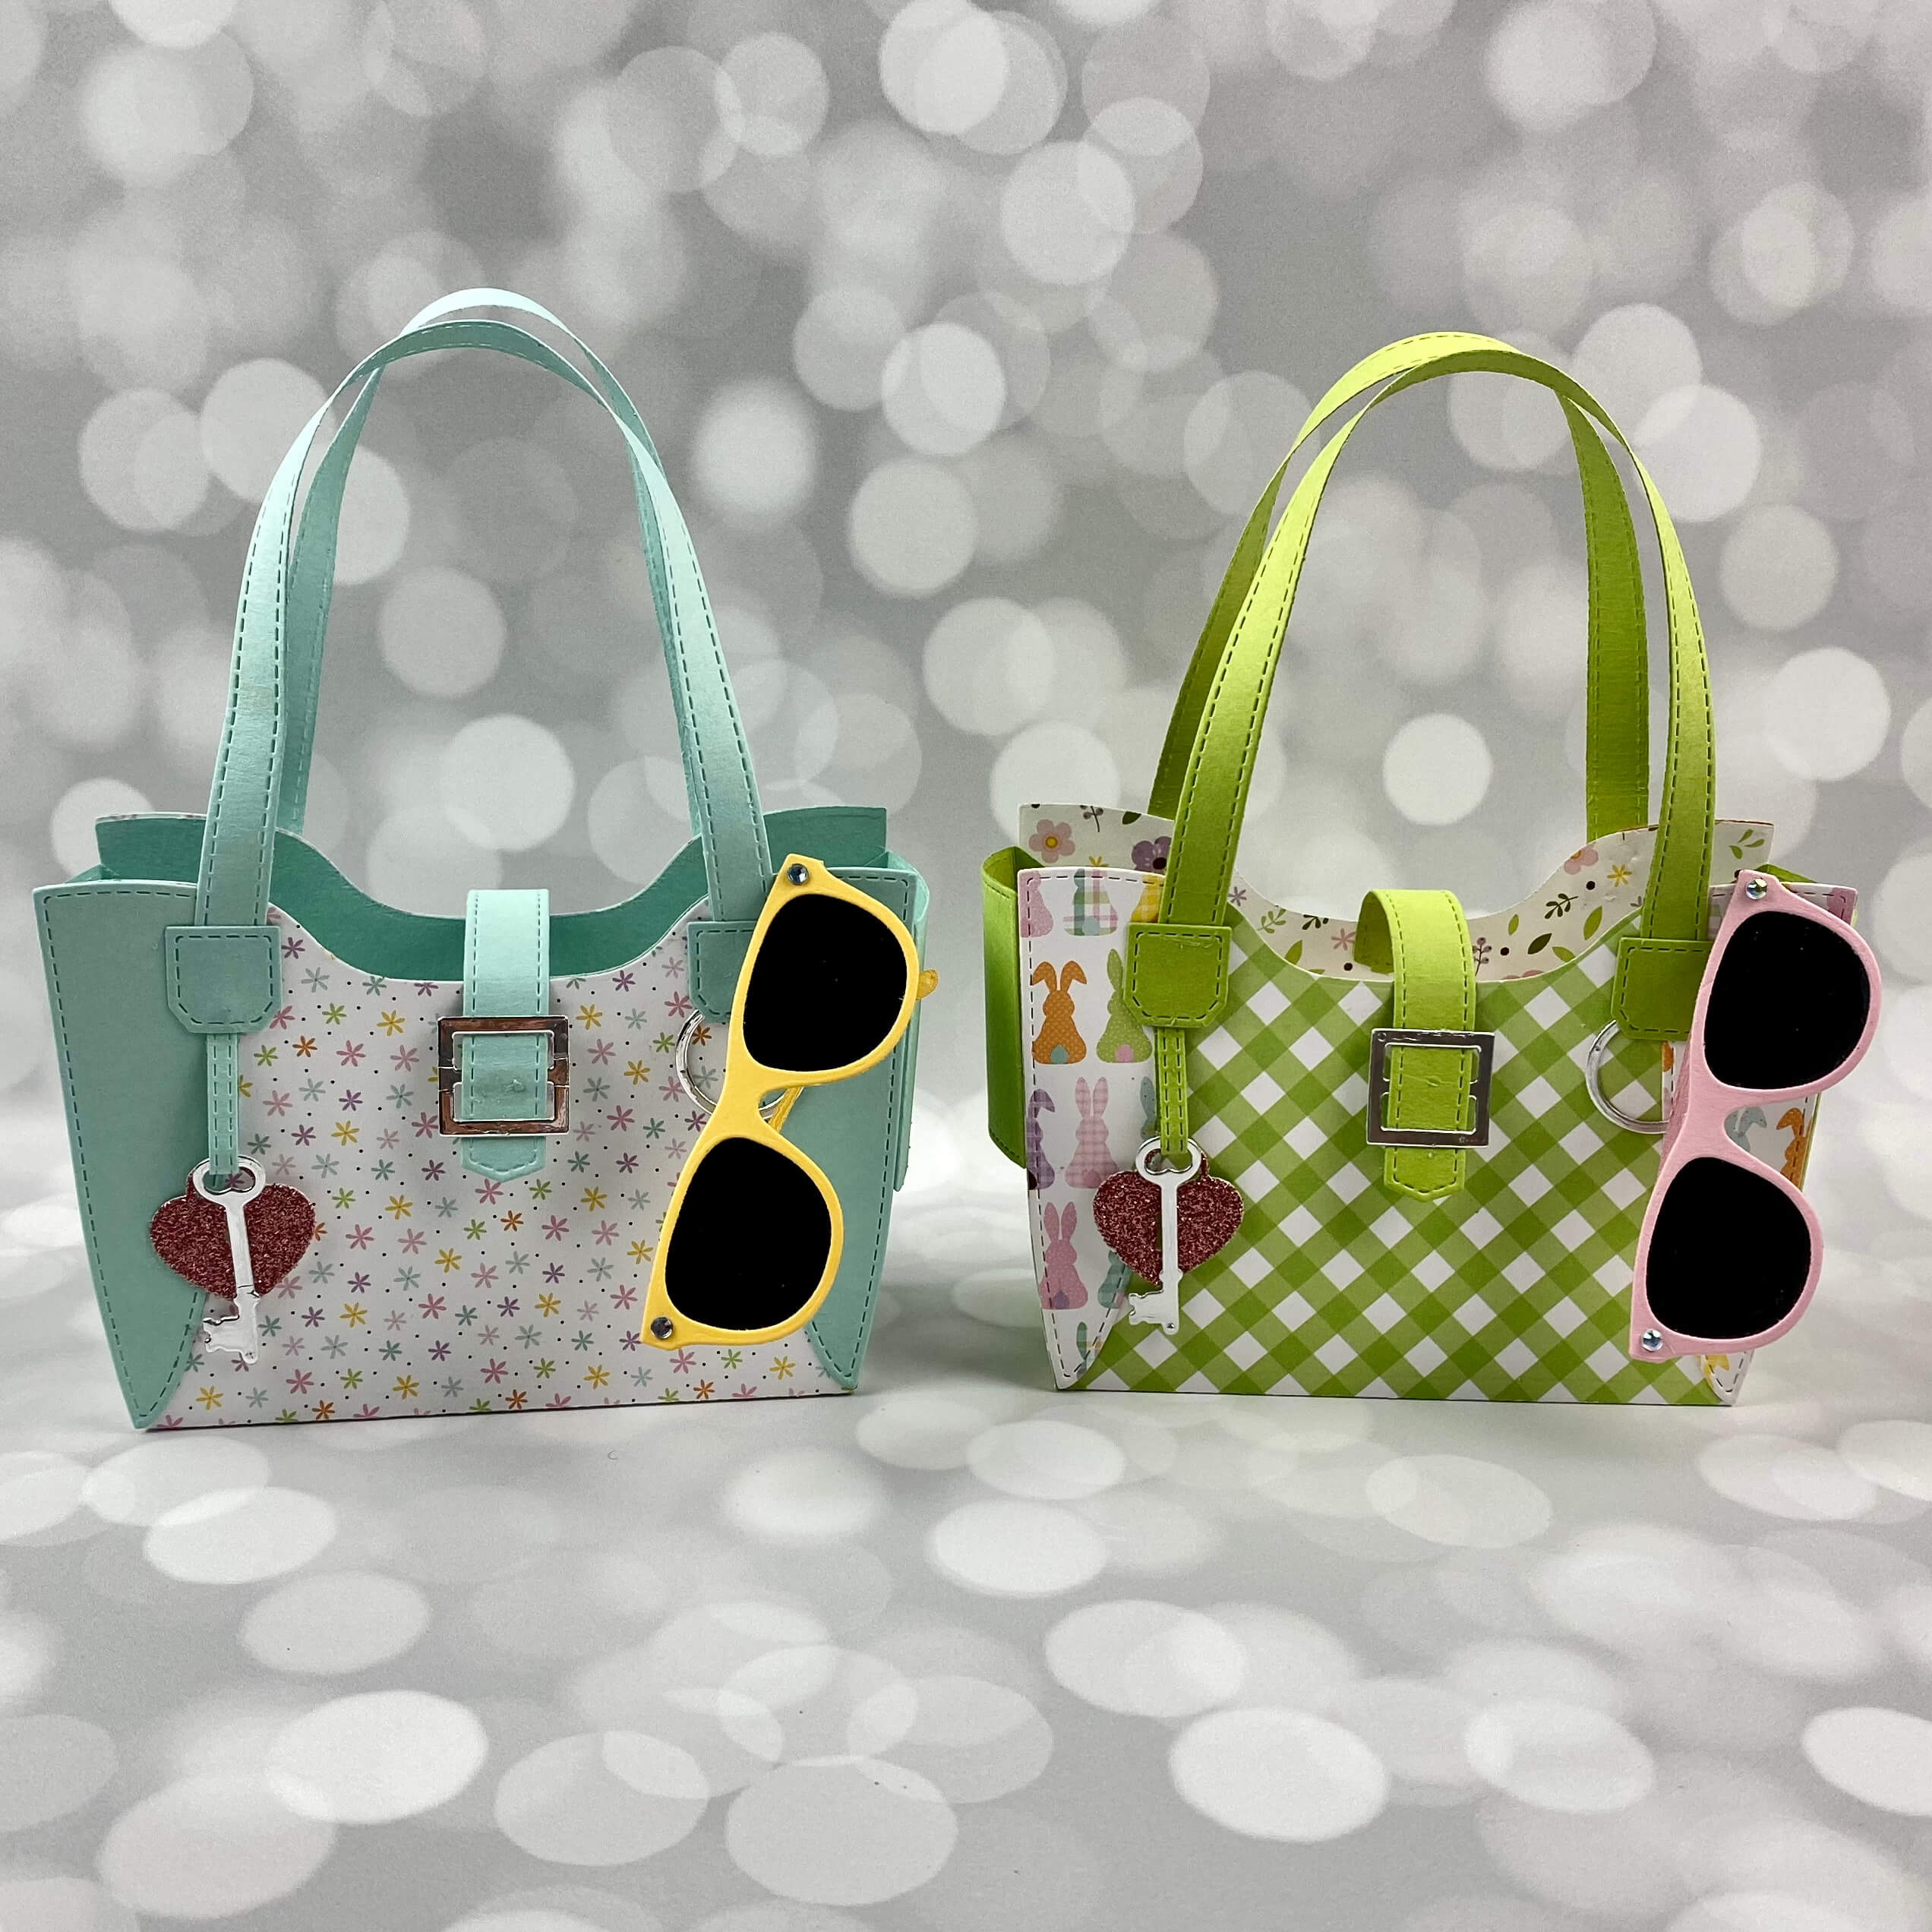 Paper Handbags For Spring And Easter - Shop